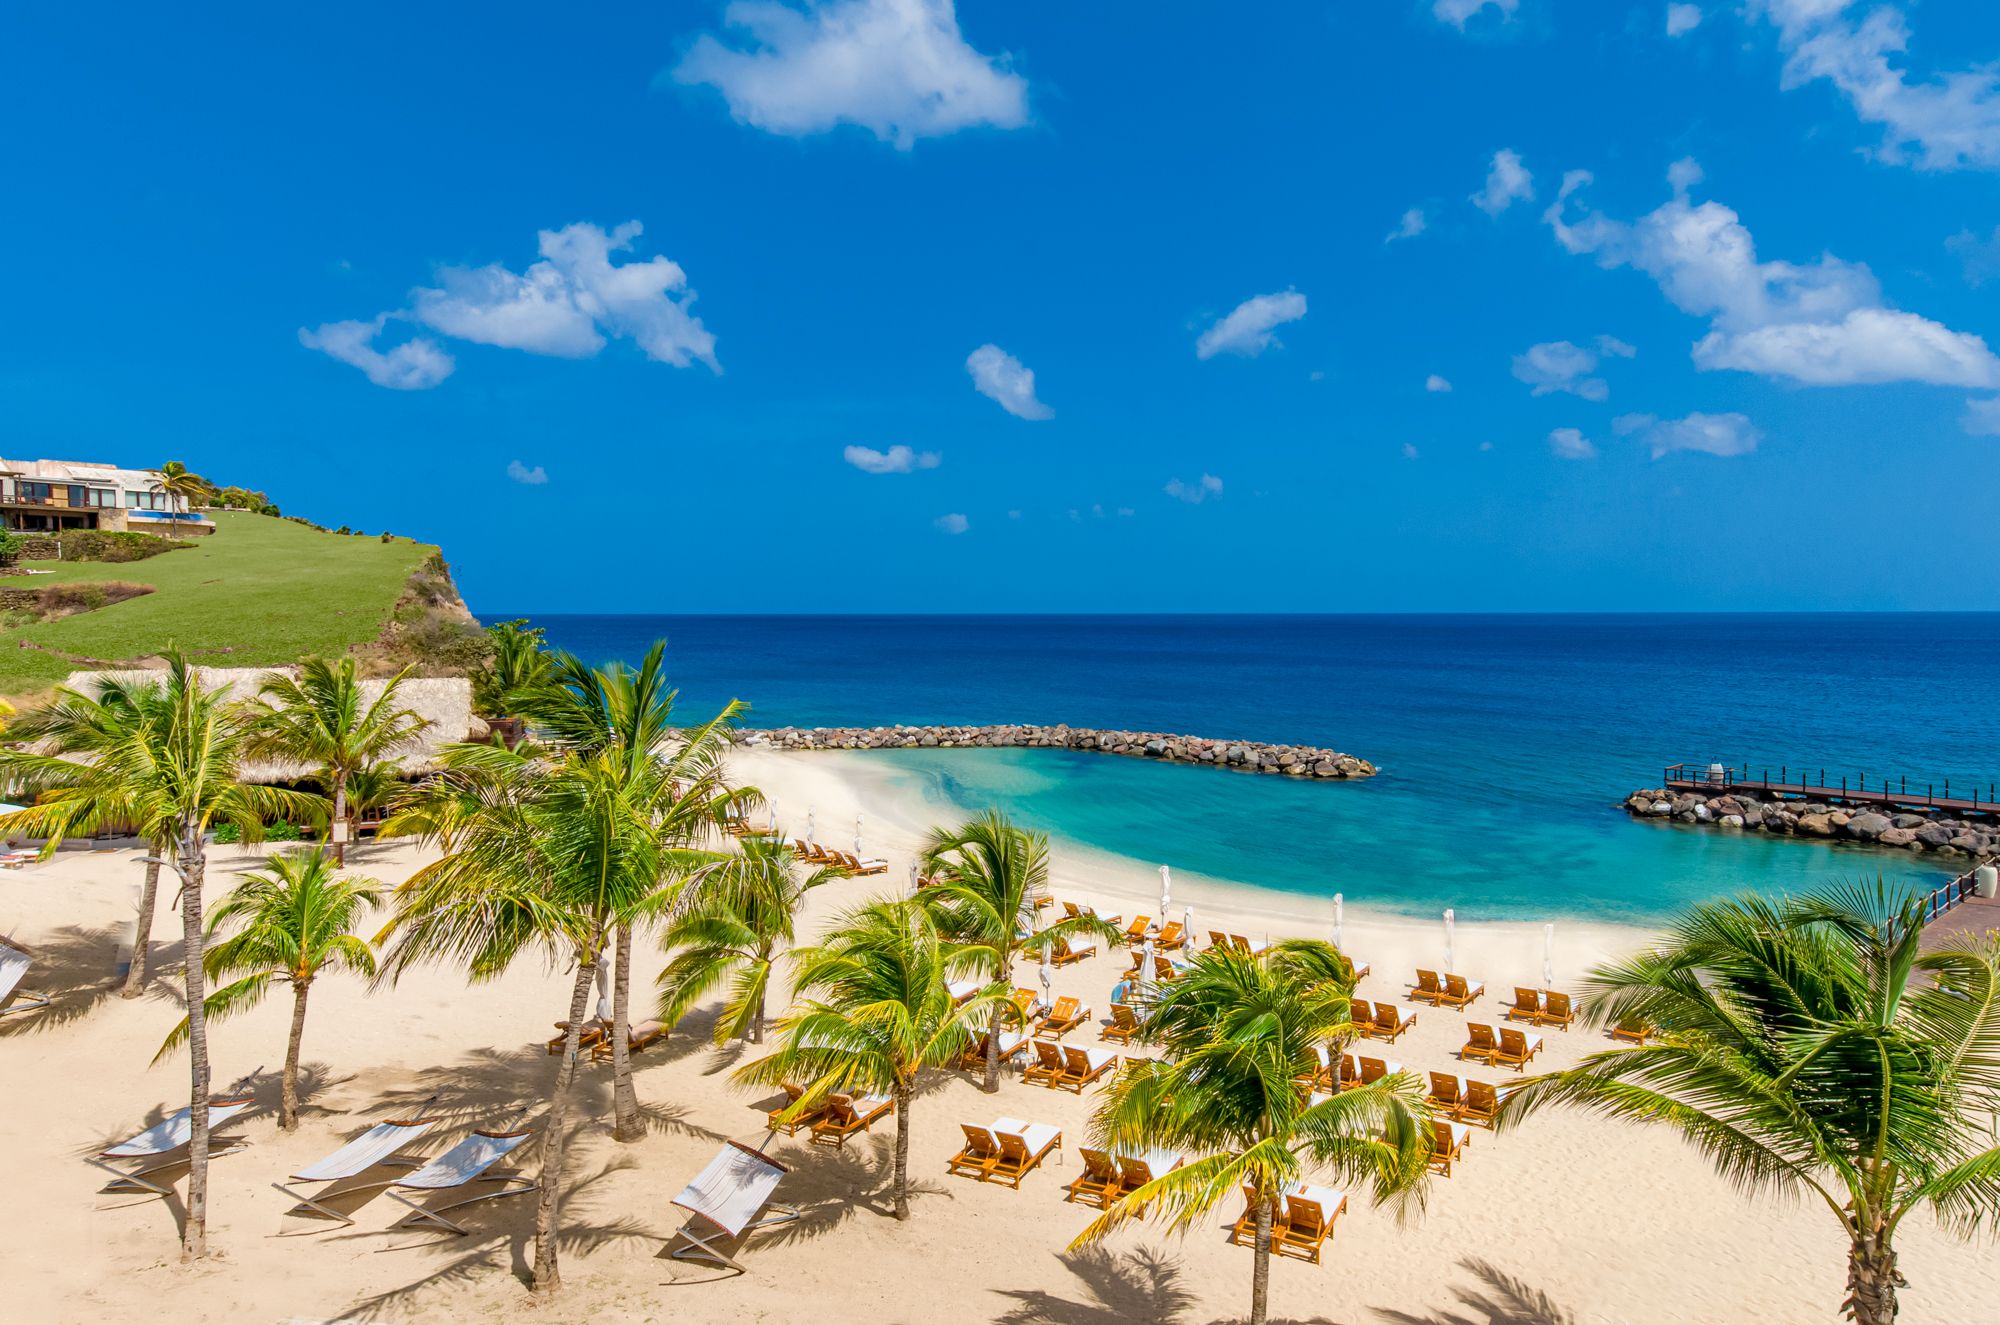 17 Amazing Things Grenada Is Known For